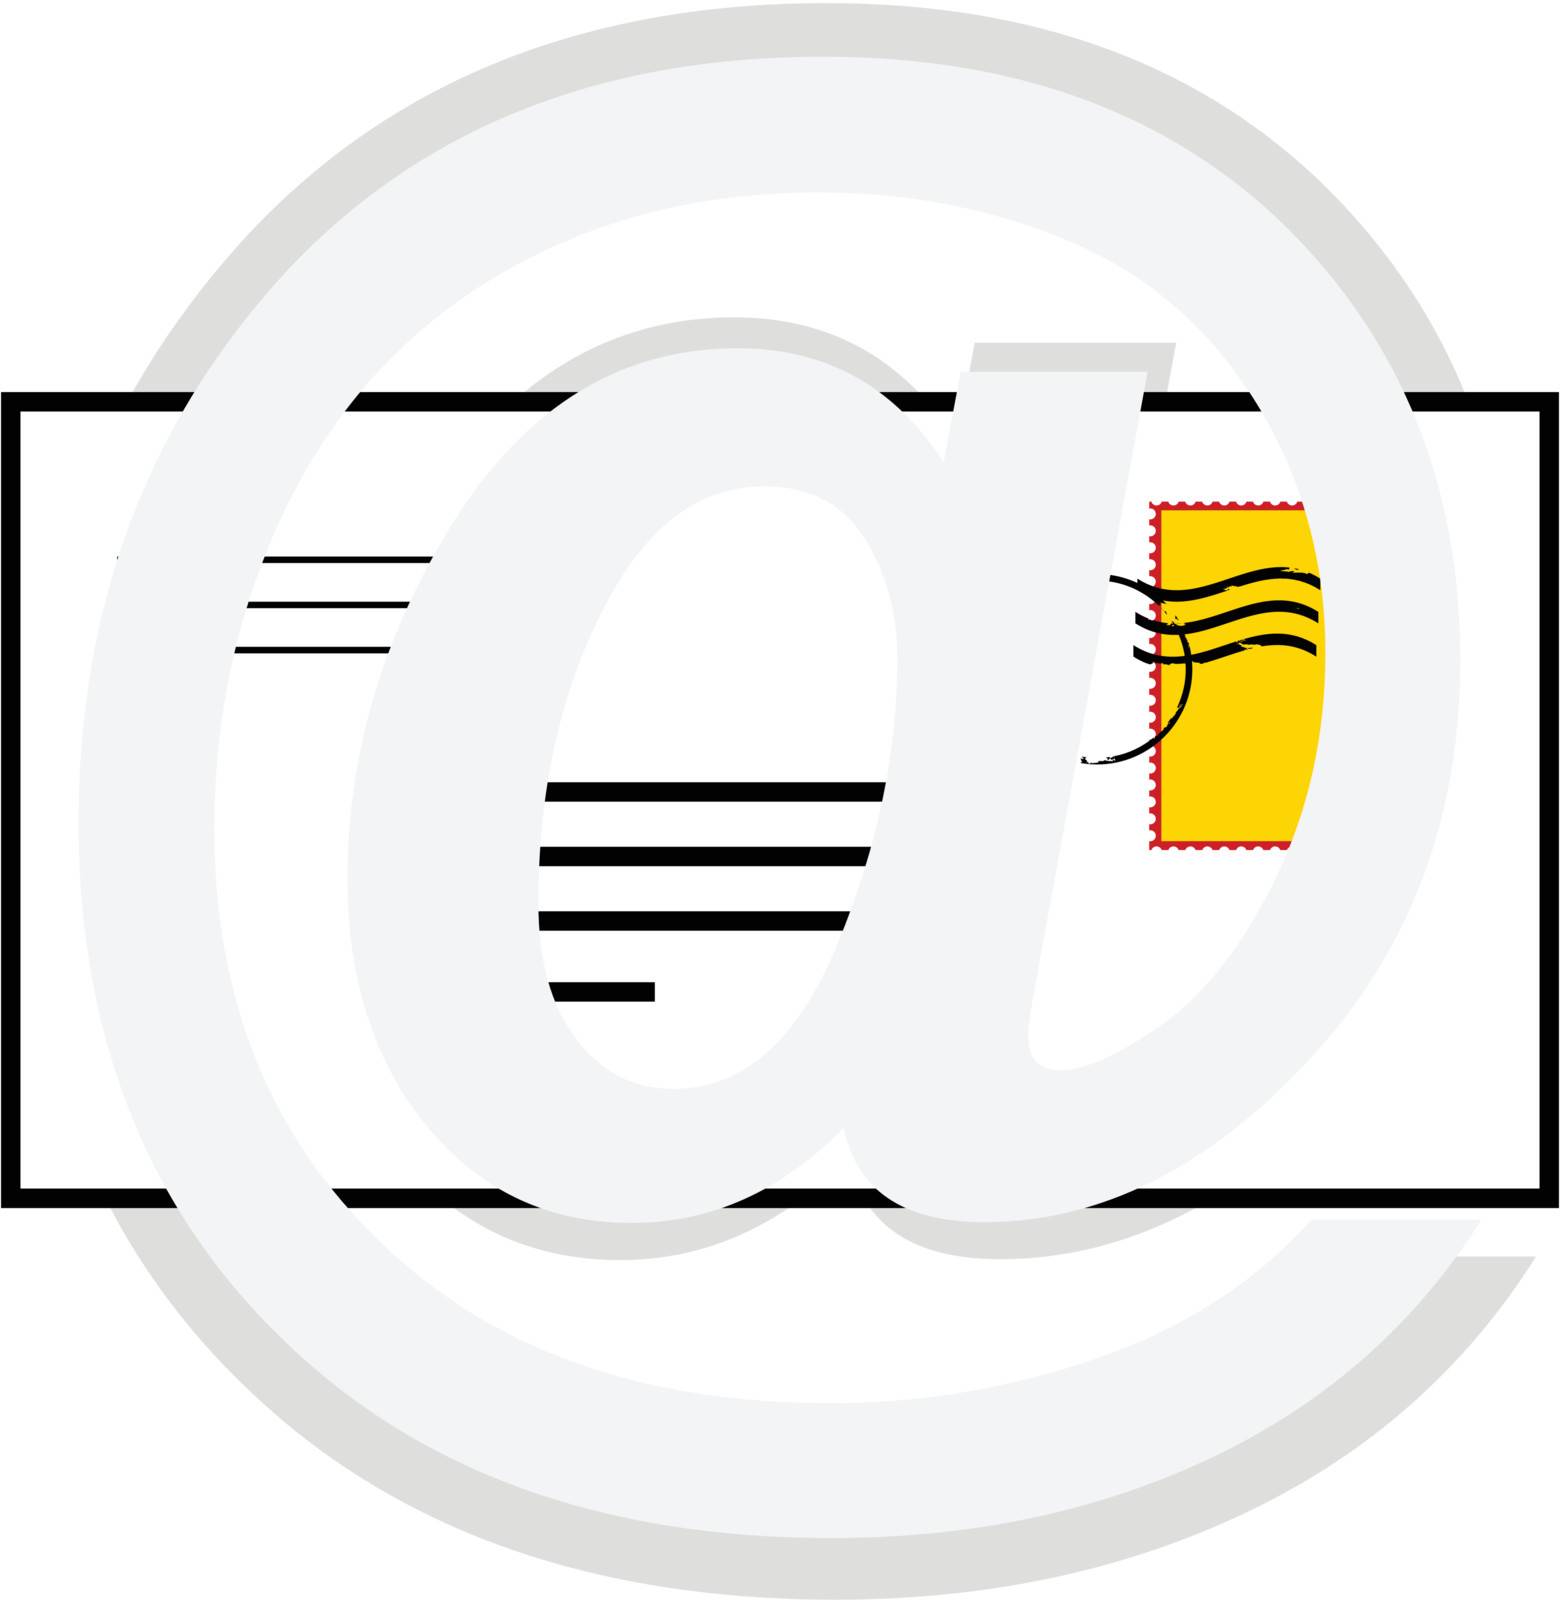 Concept illustration showing a stamped letter with a @ sign, to represent an e-mail